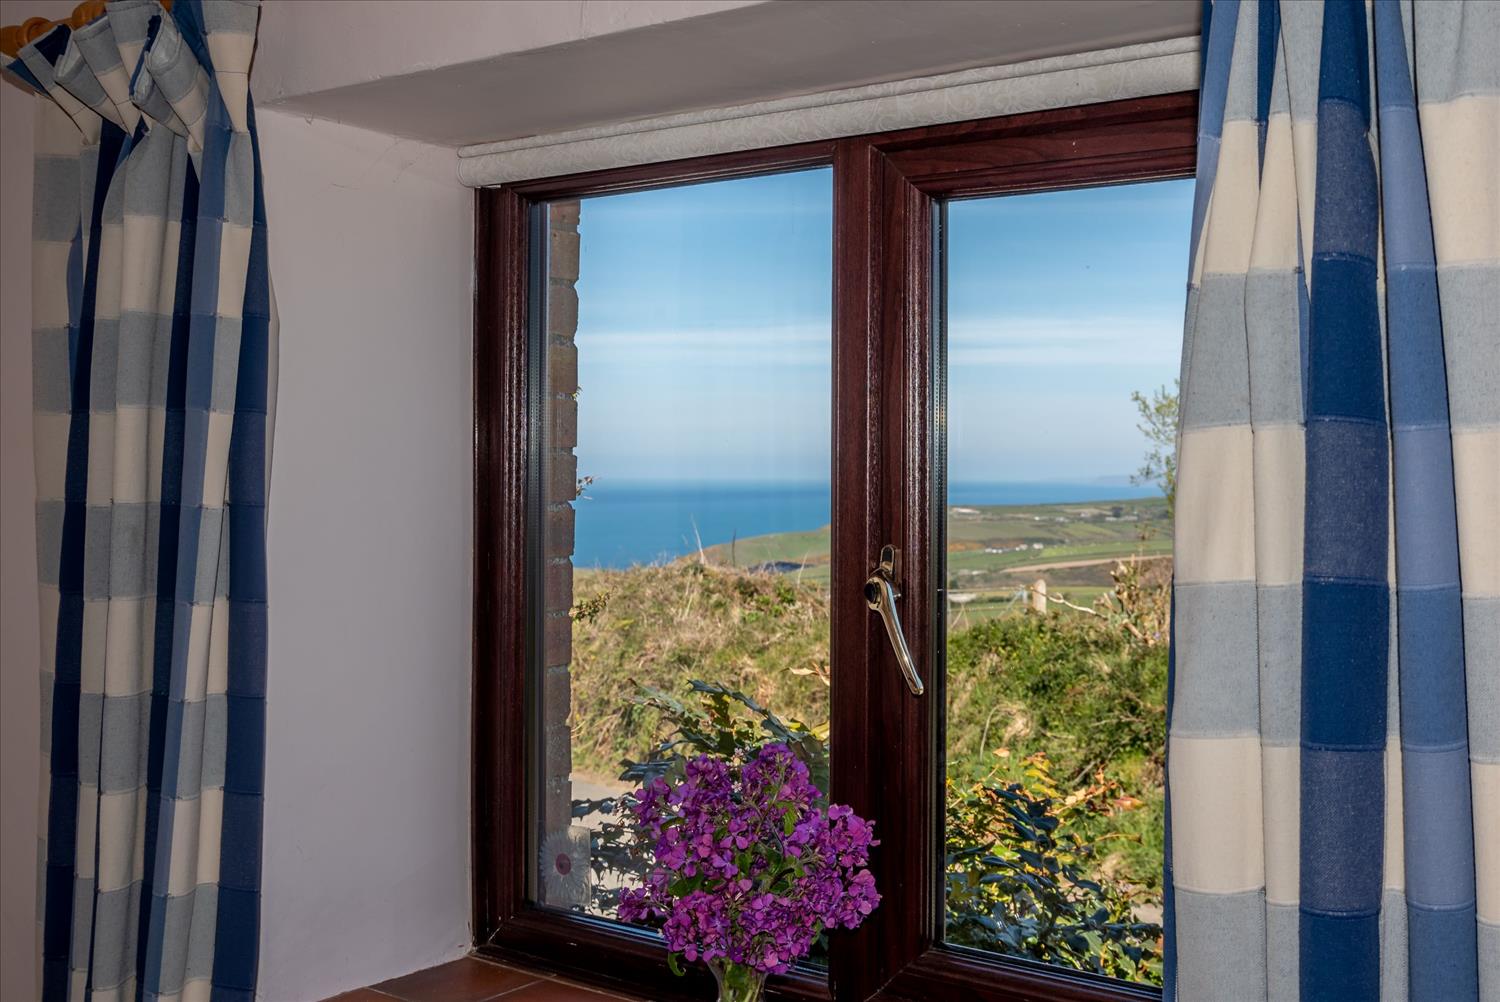 Sea view from the double bedroom at Seaberry, one of our traditional barn conversion cottages at Polrunny Farm